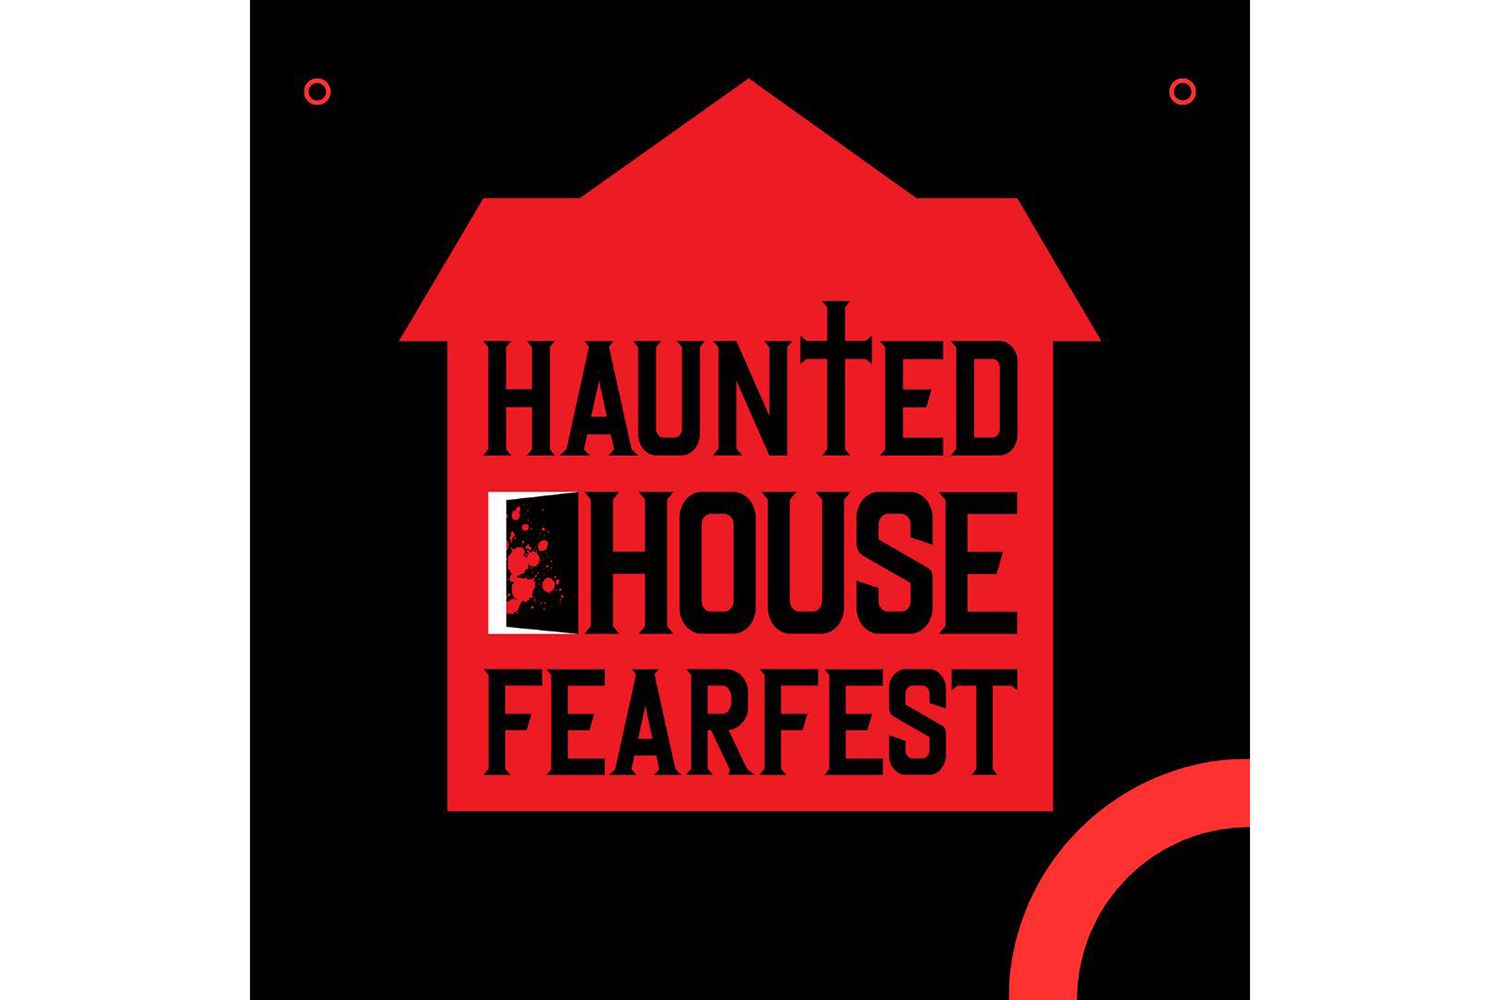 Haunted House FearFest movie and gaming festival coming to New York this Halloween